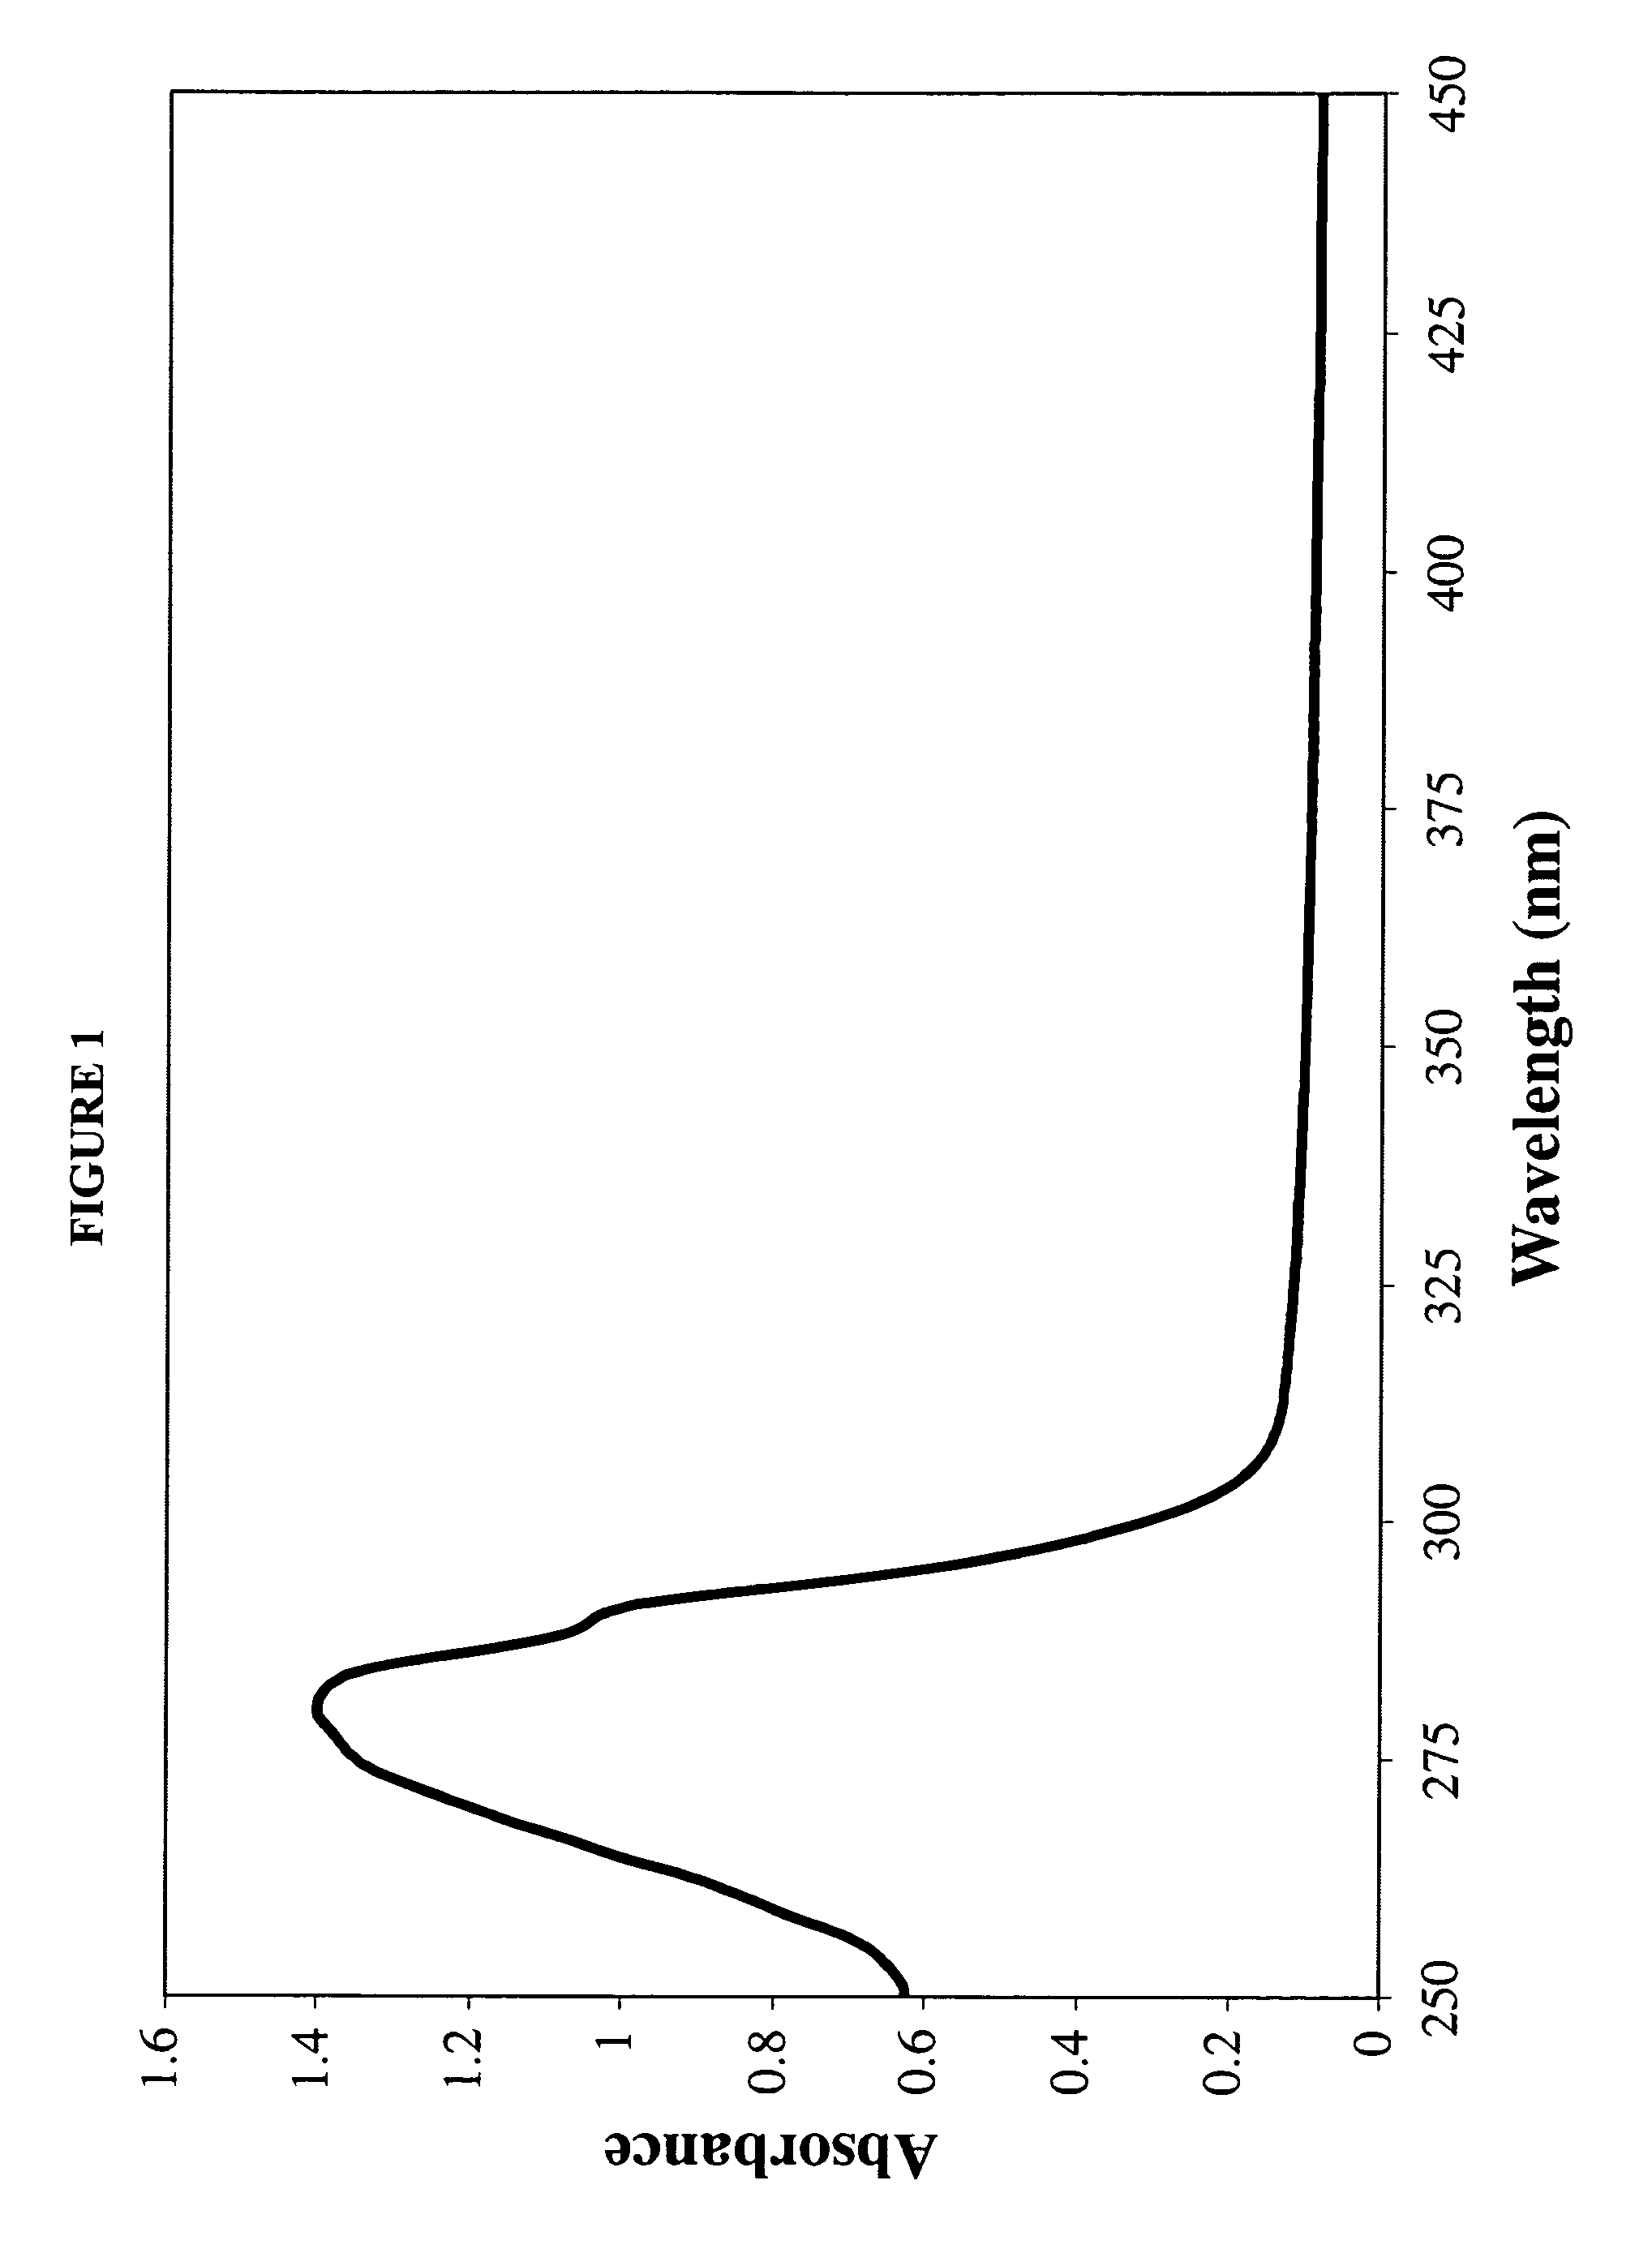 Lipophilic drug delivery vehicle and methods of use thereof